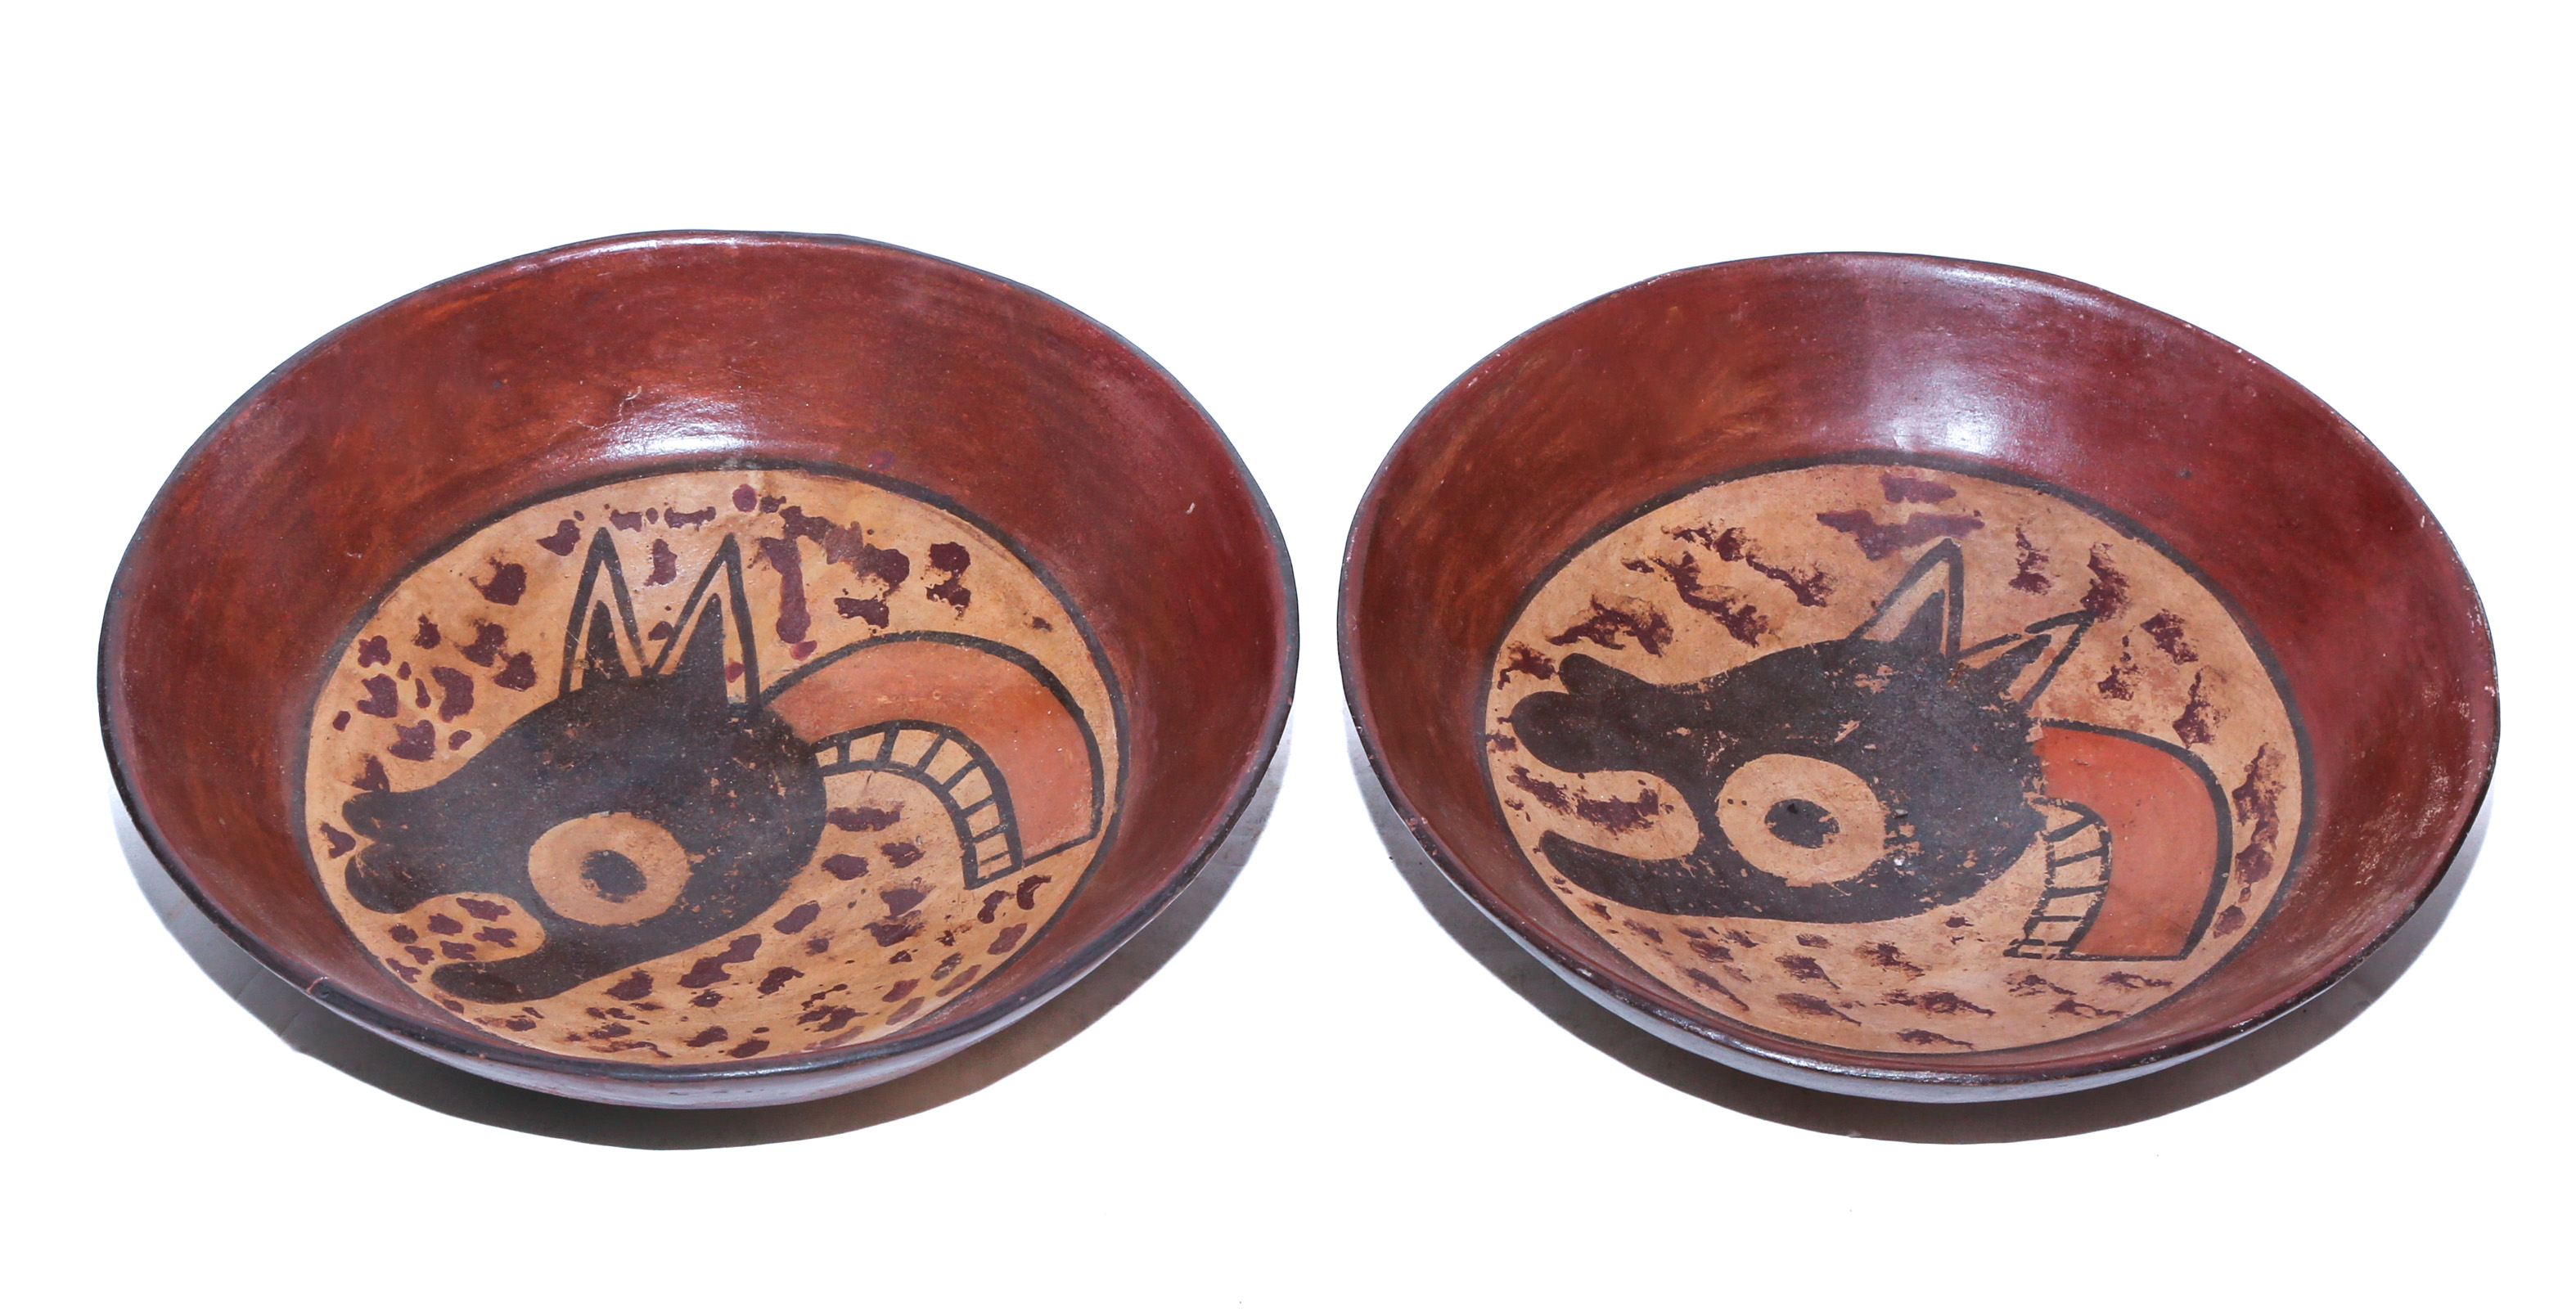 MATCHED PAIR OF NAZCA PAINTED EARTHENWARE 308ac6